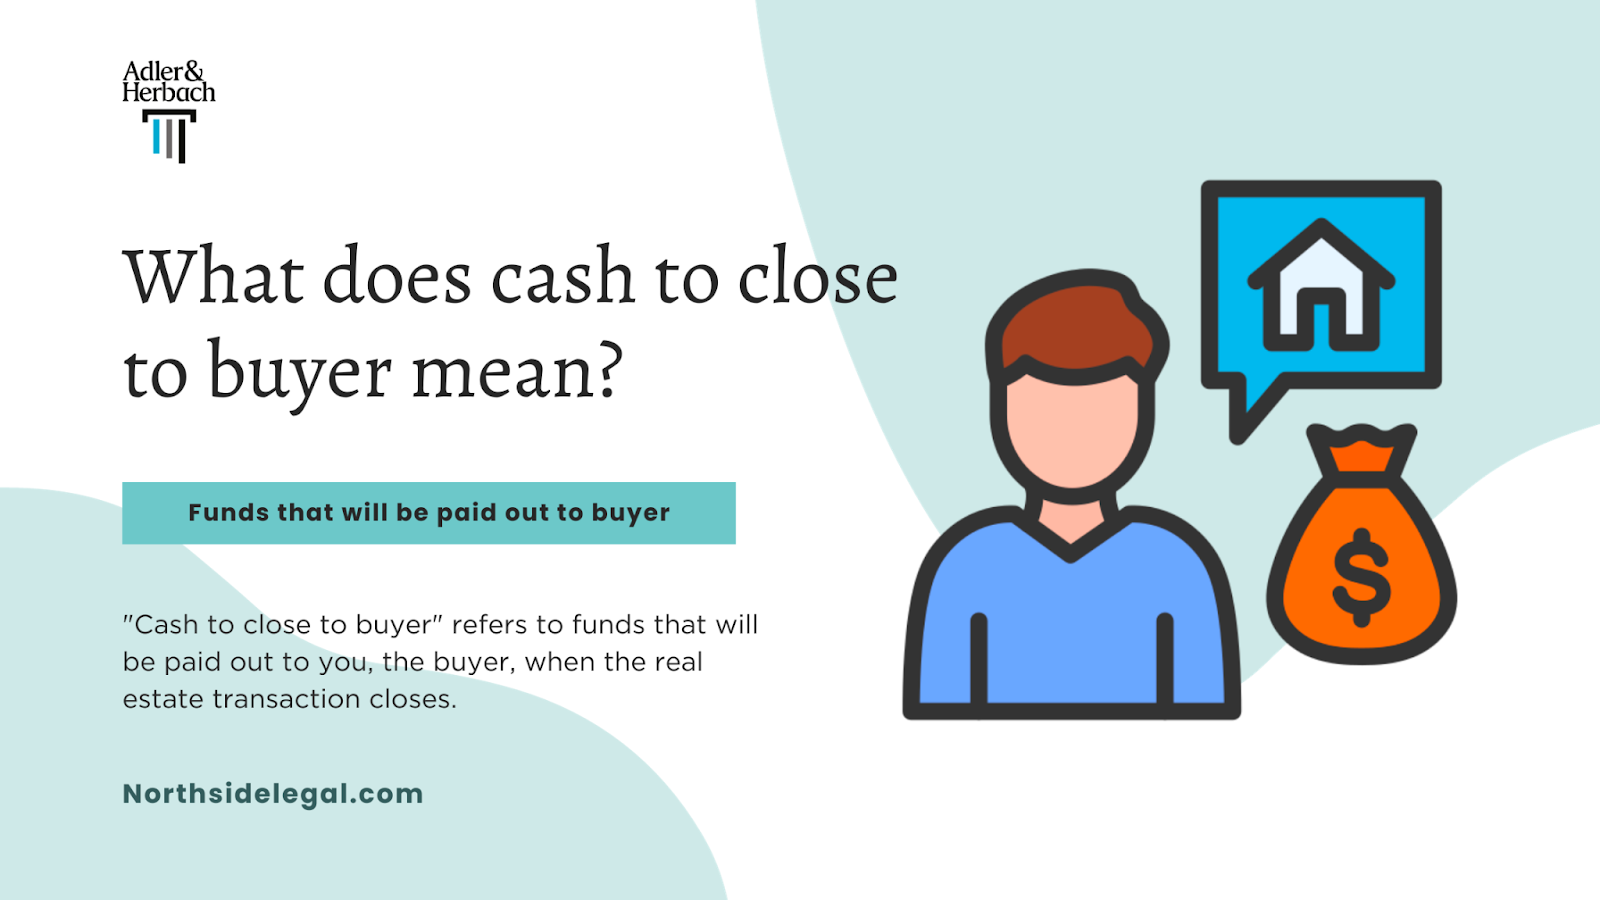 What does “cash to close to buyer” mean on a House?